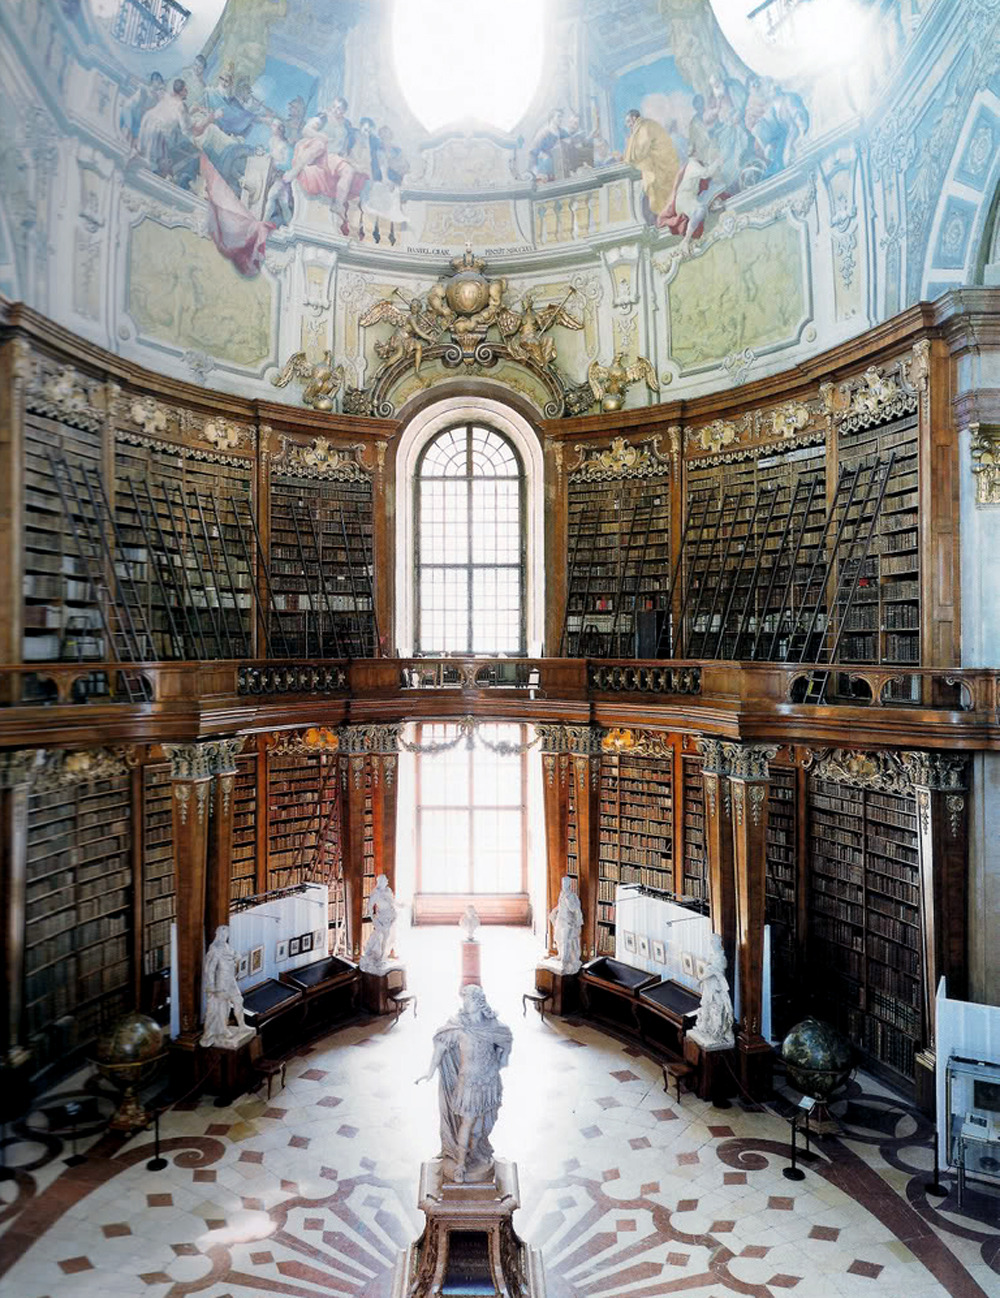 bookgeekconfessions:   Candida Hofer - Libraries (published 2005)  LIBRARIES! LIBRARIES